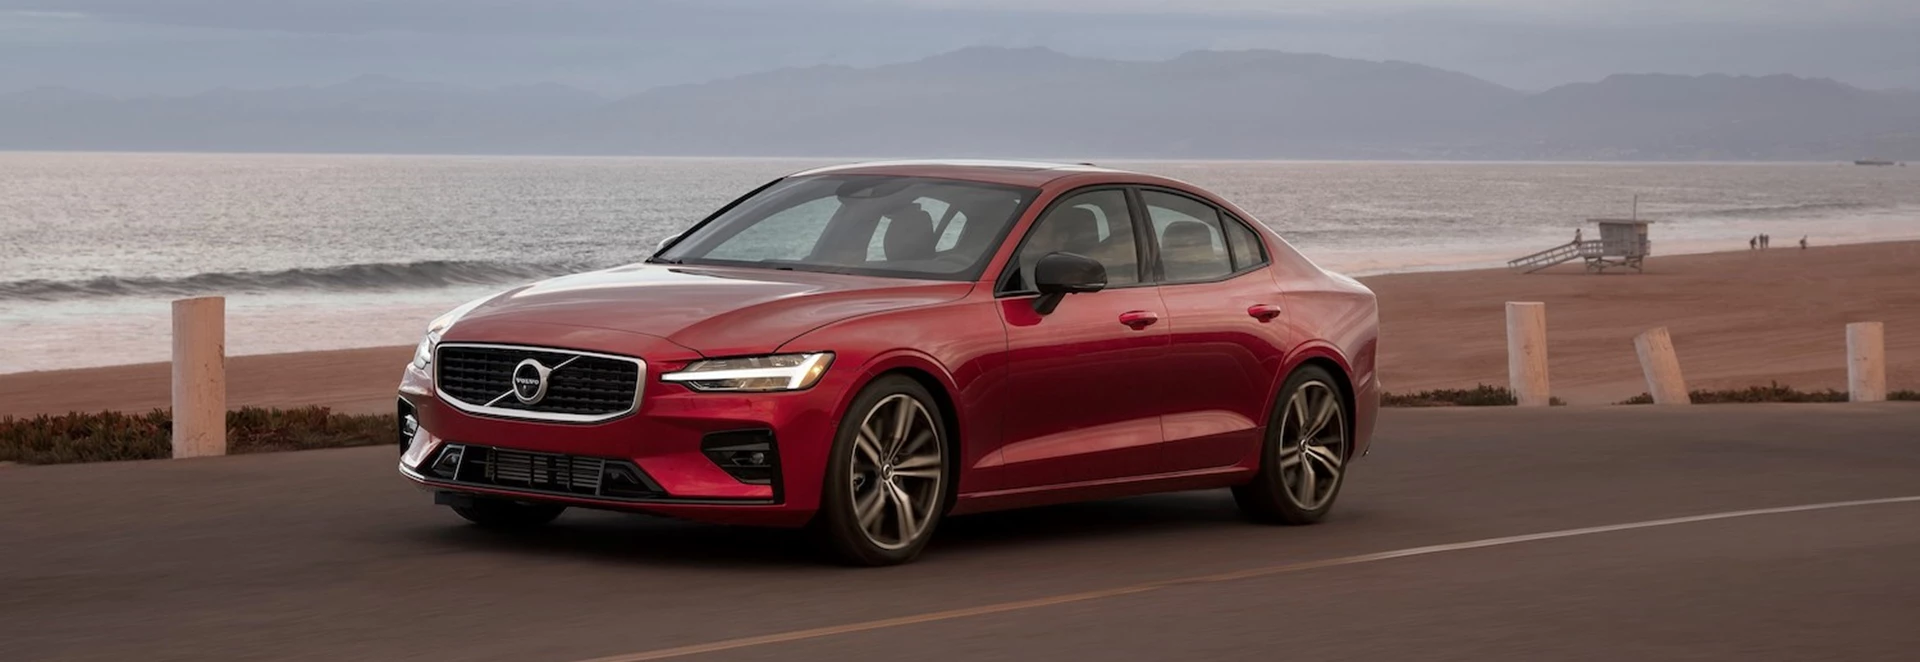 Volvo to limit top speed of cars to 112mph in 2020